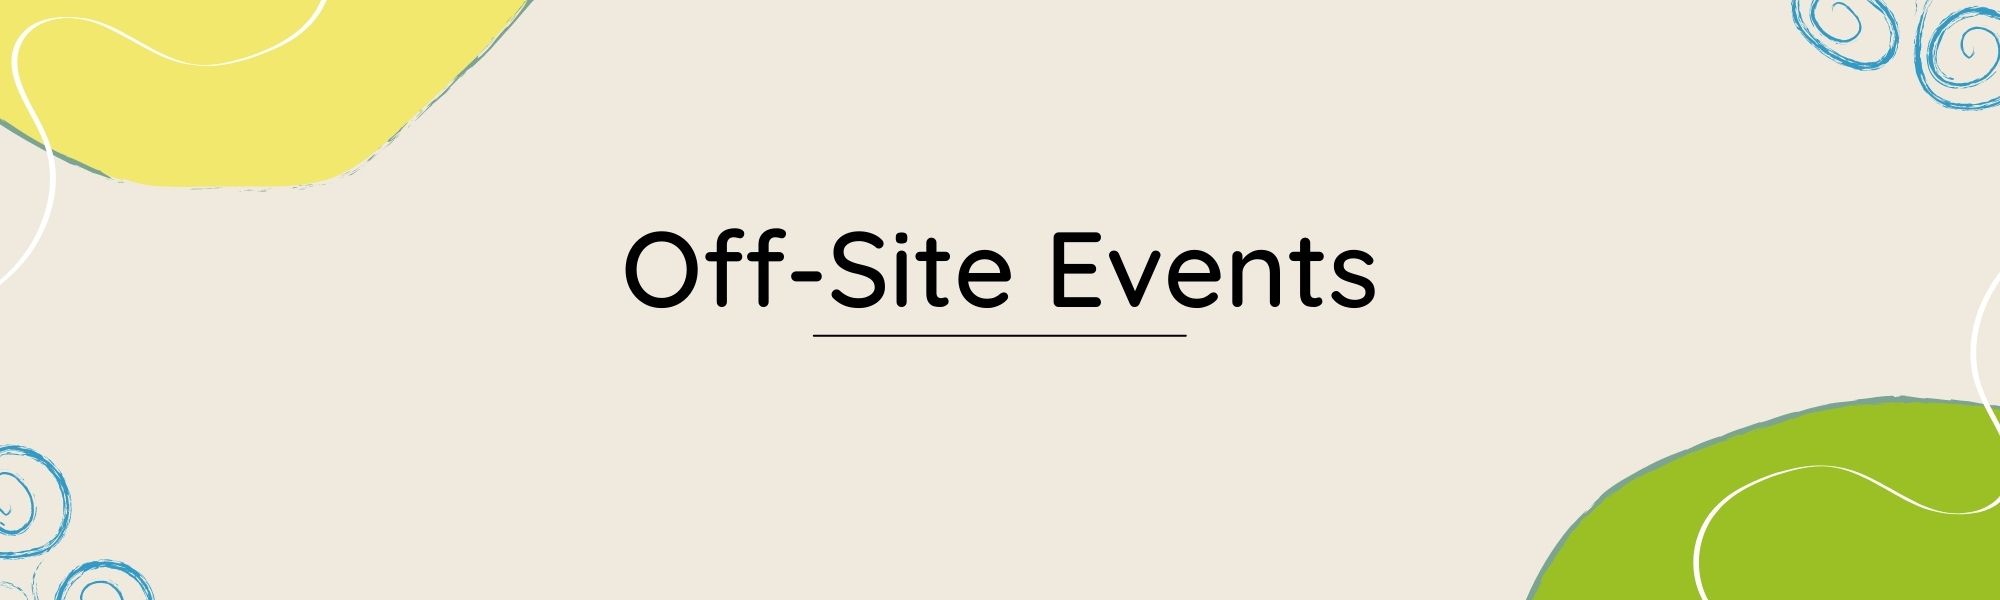 Off-Site Events